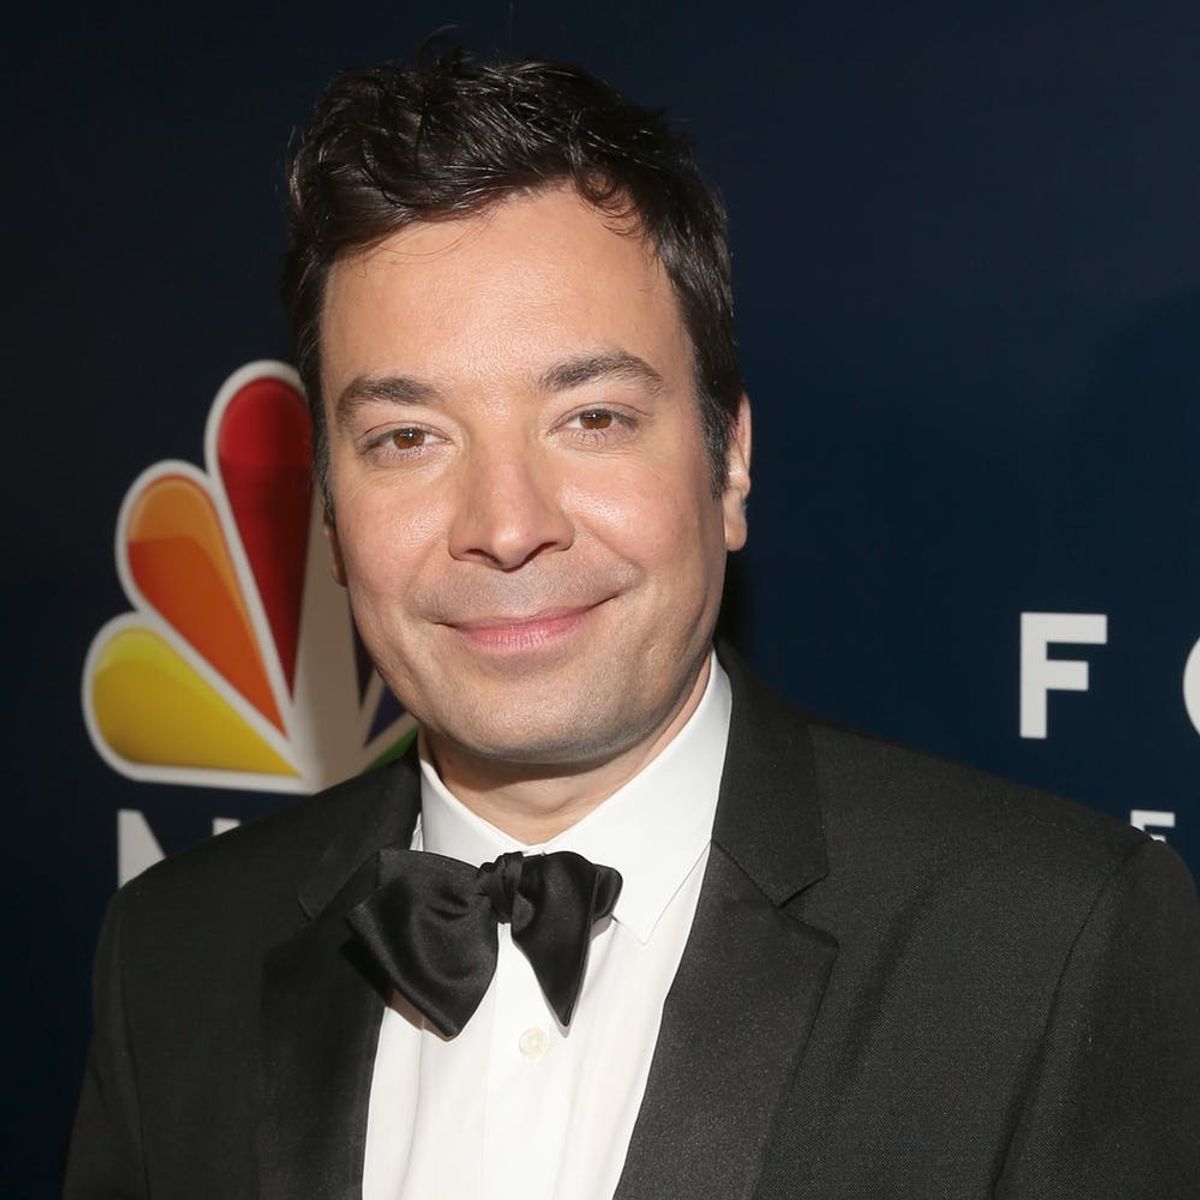 Jimmy Fallon Broke Down Paying Tribute to His Late Mother in His “Tonight Show” Return